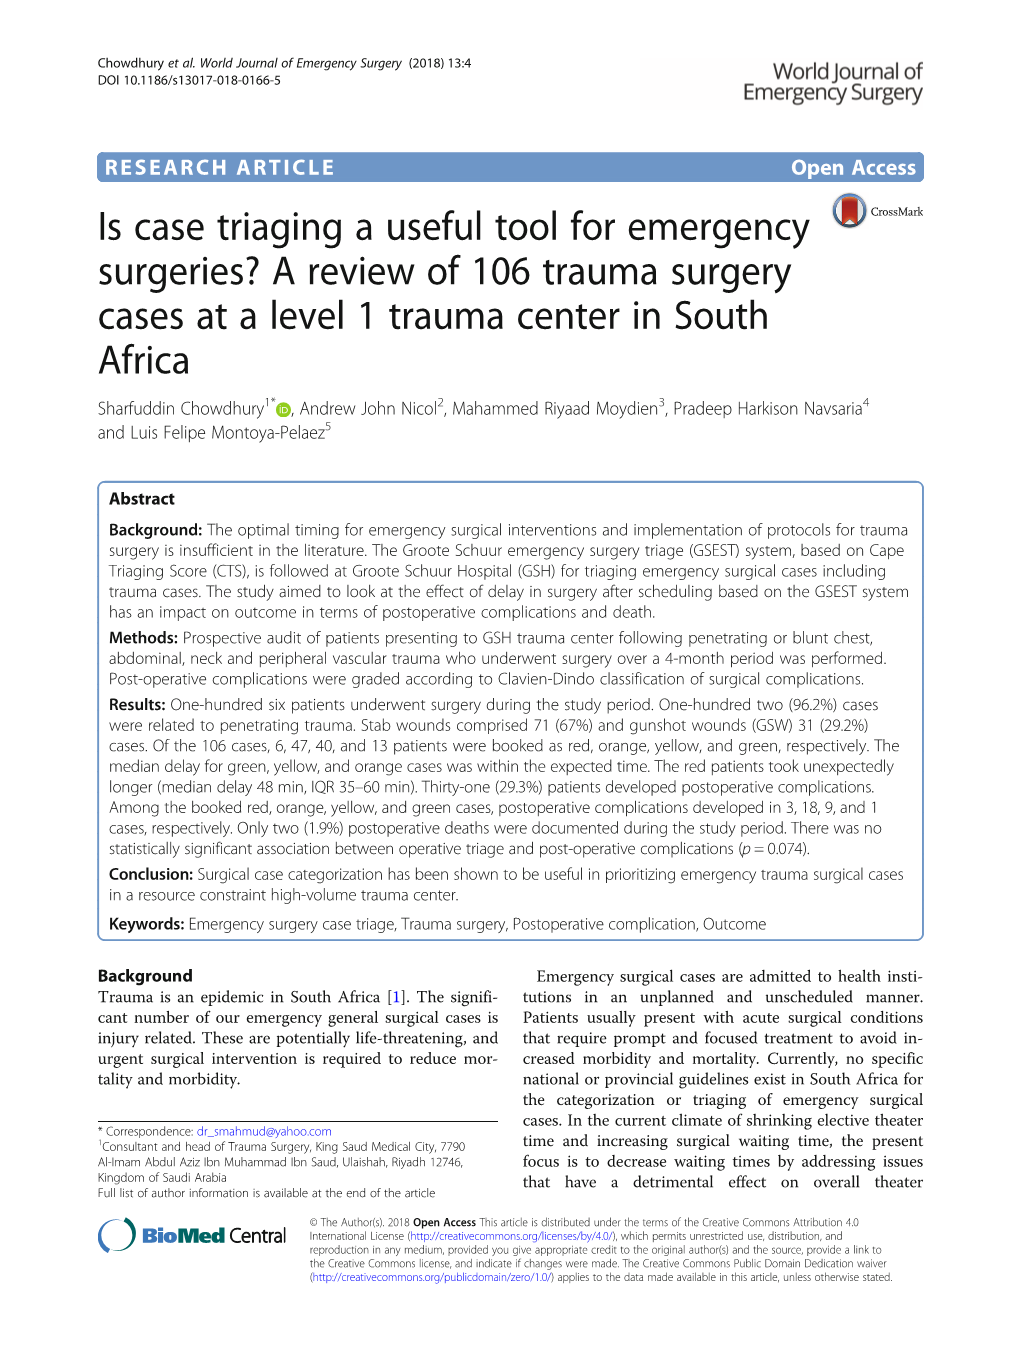 Is Case Triaging a Useful Tool for Emergency Surgeries?